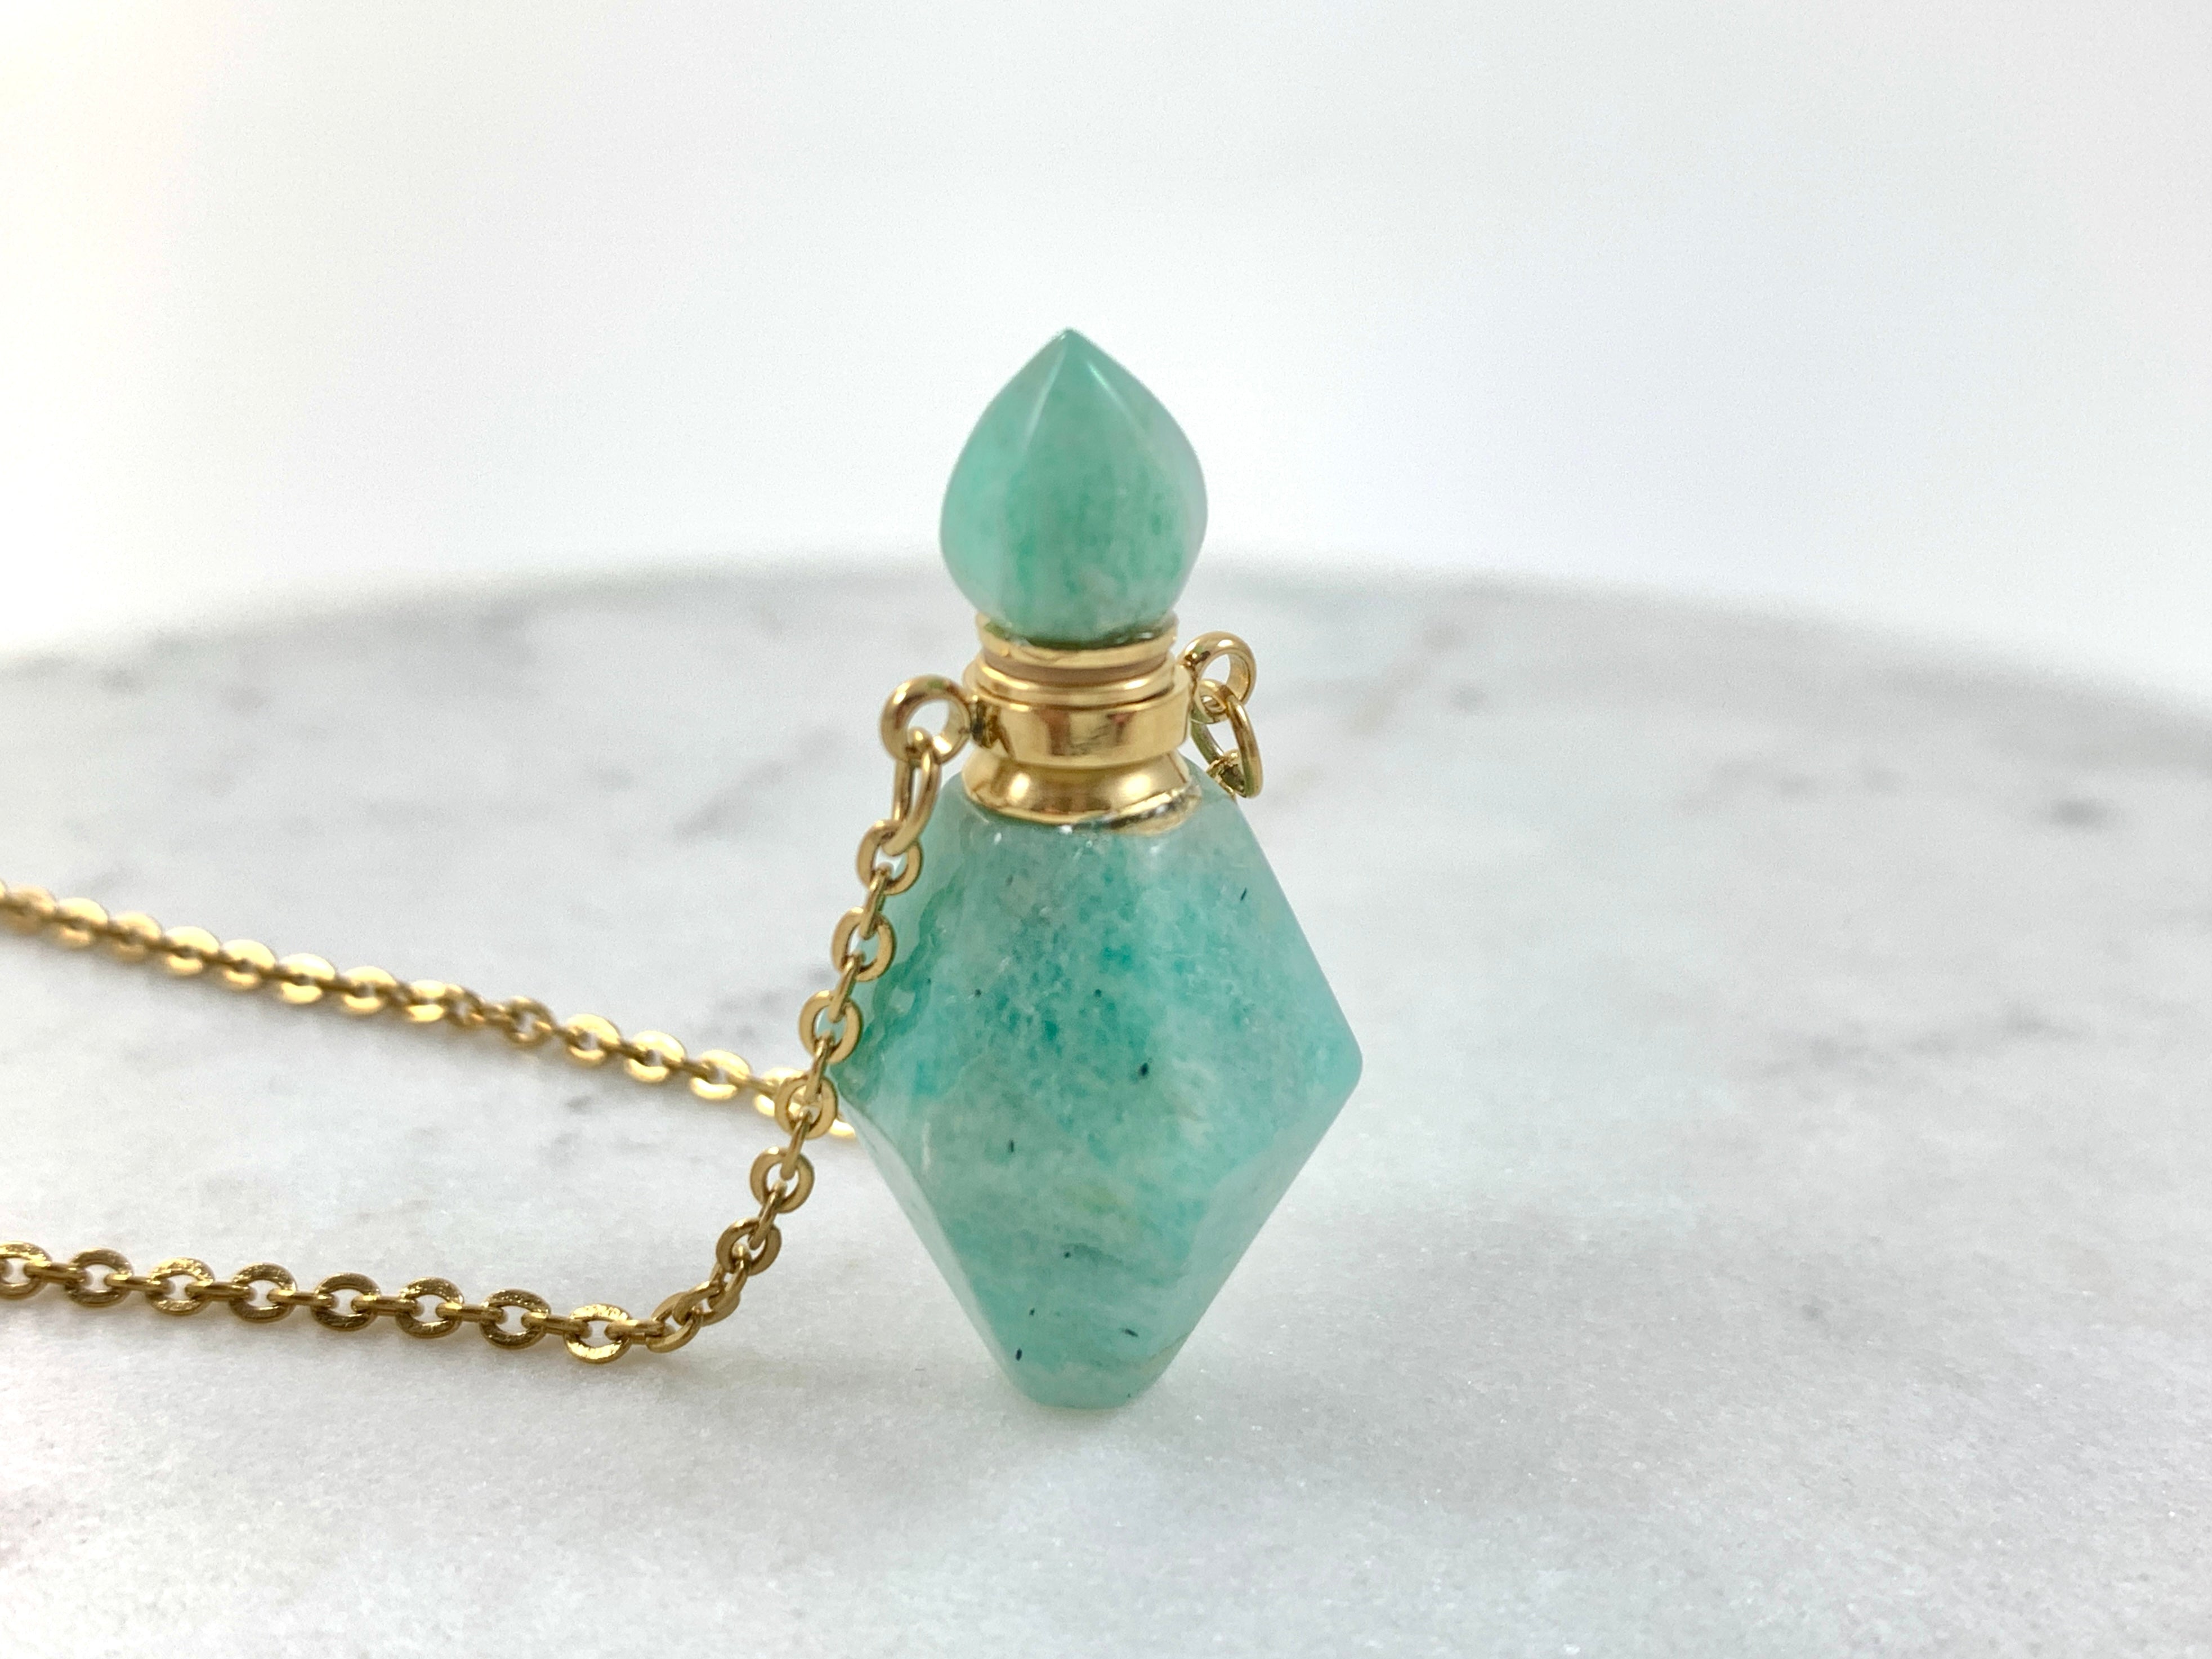 14k Gold Potion Bottle Necklaces | Danielle Gerber Freedom Jewelry